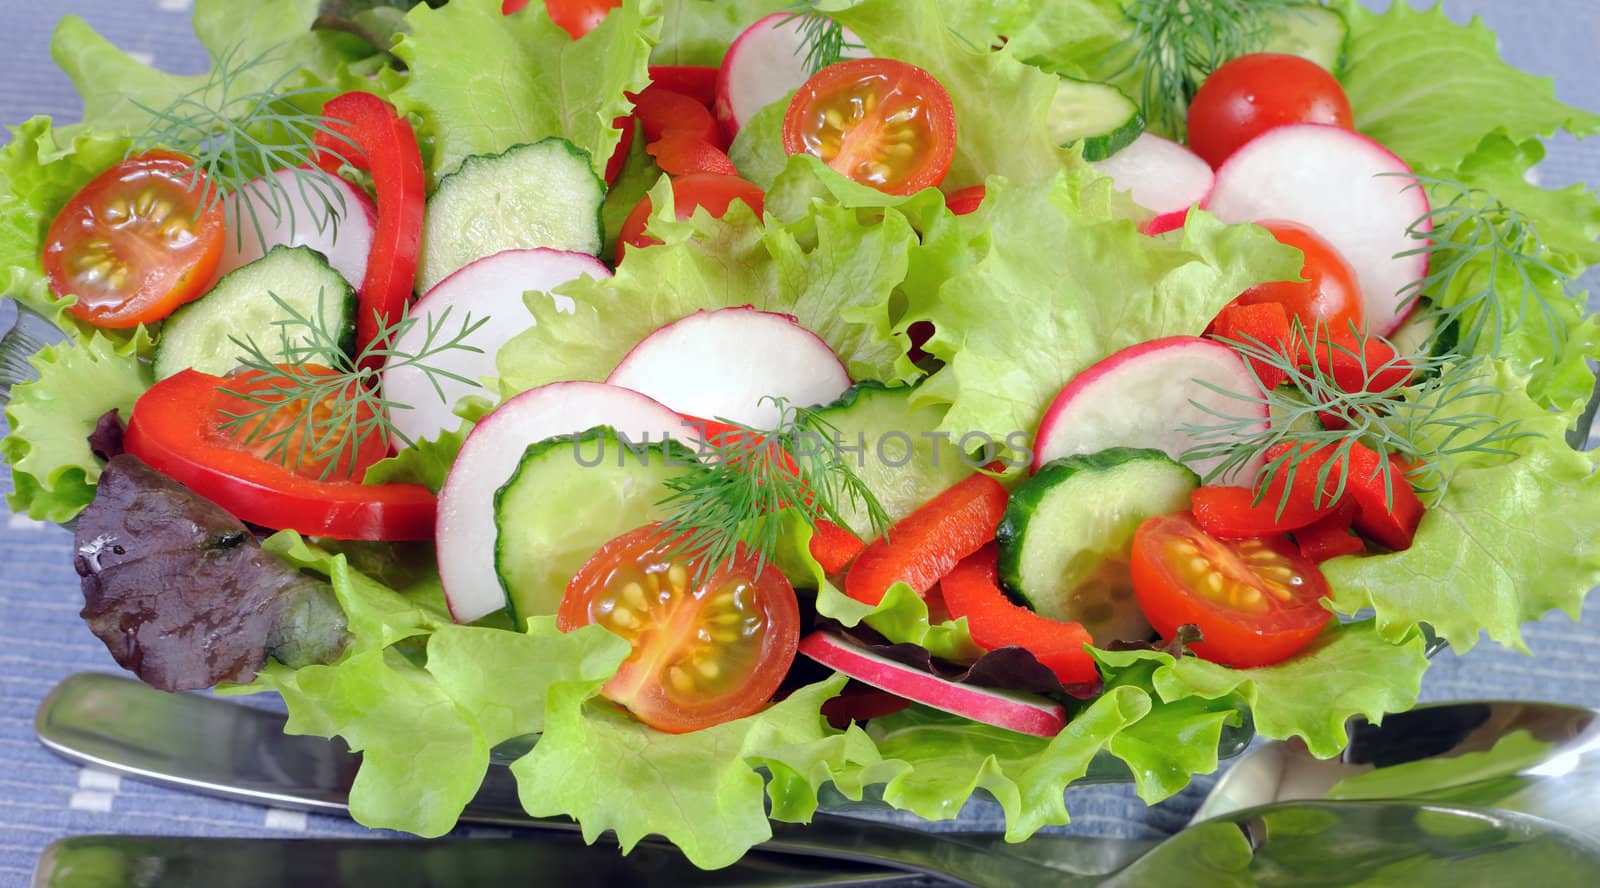 Summer salad of fresh vegetables by Apolonia